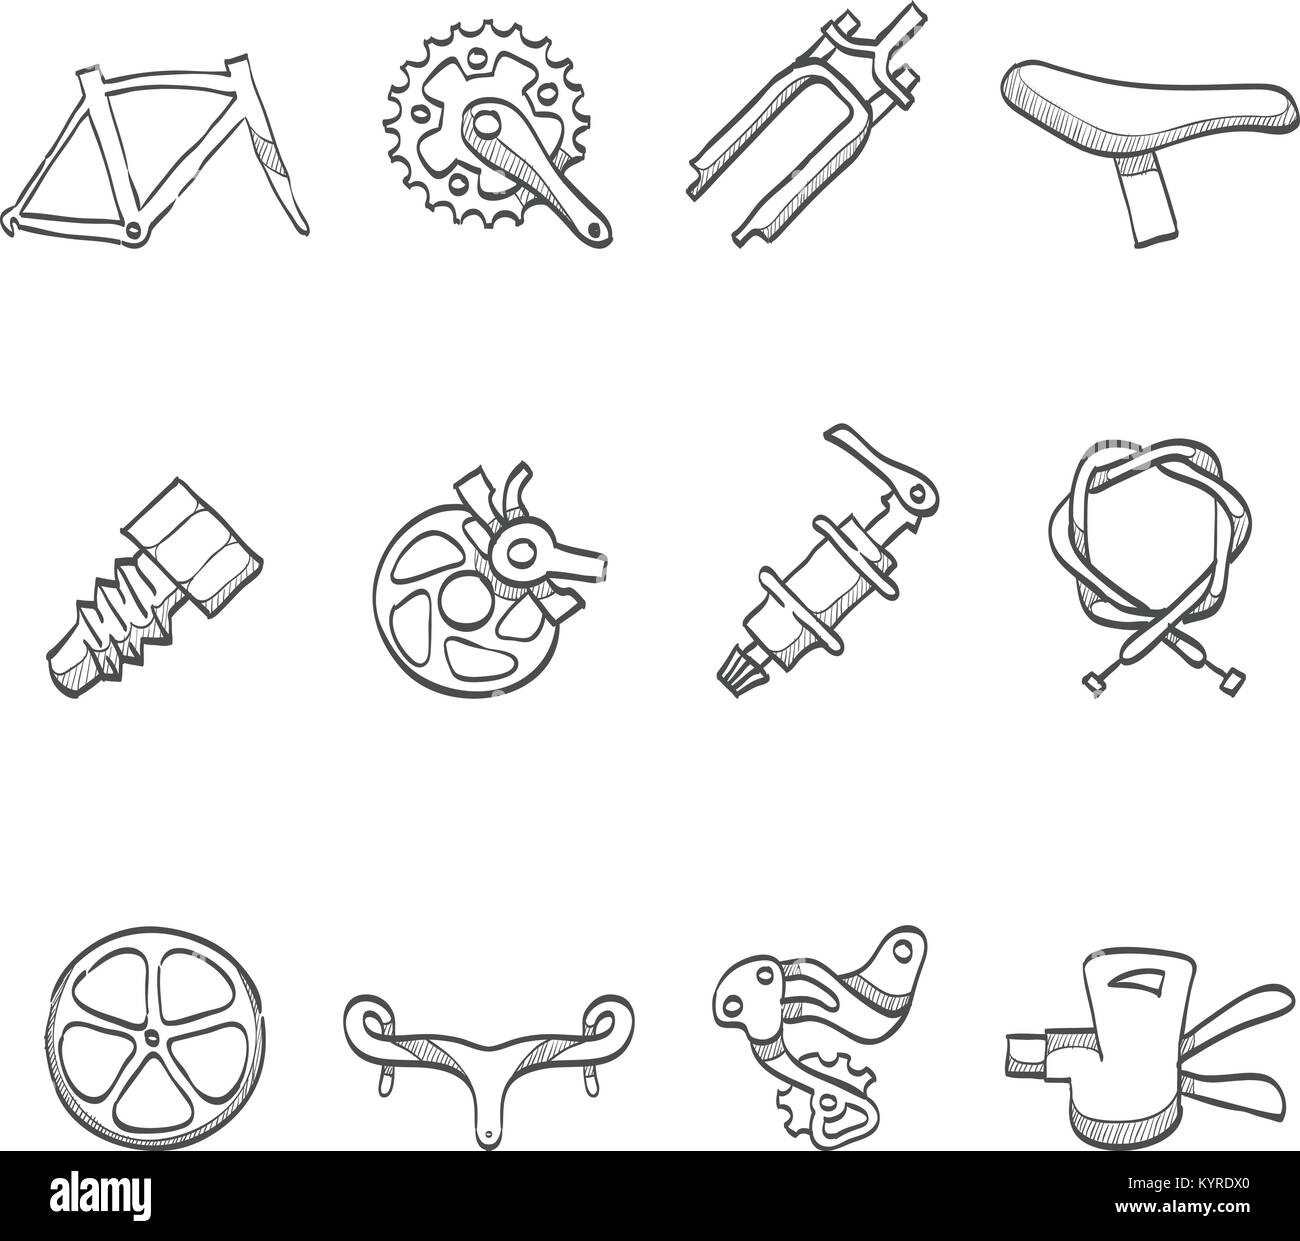 Bicycle part icons series in sketch. Stock Vector